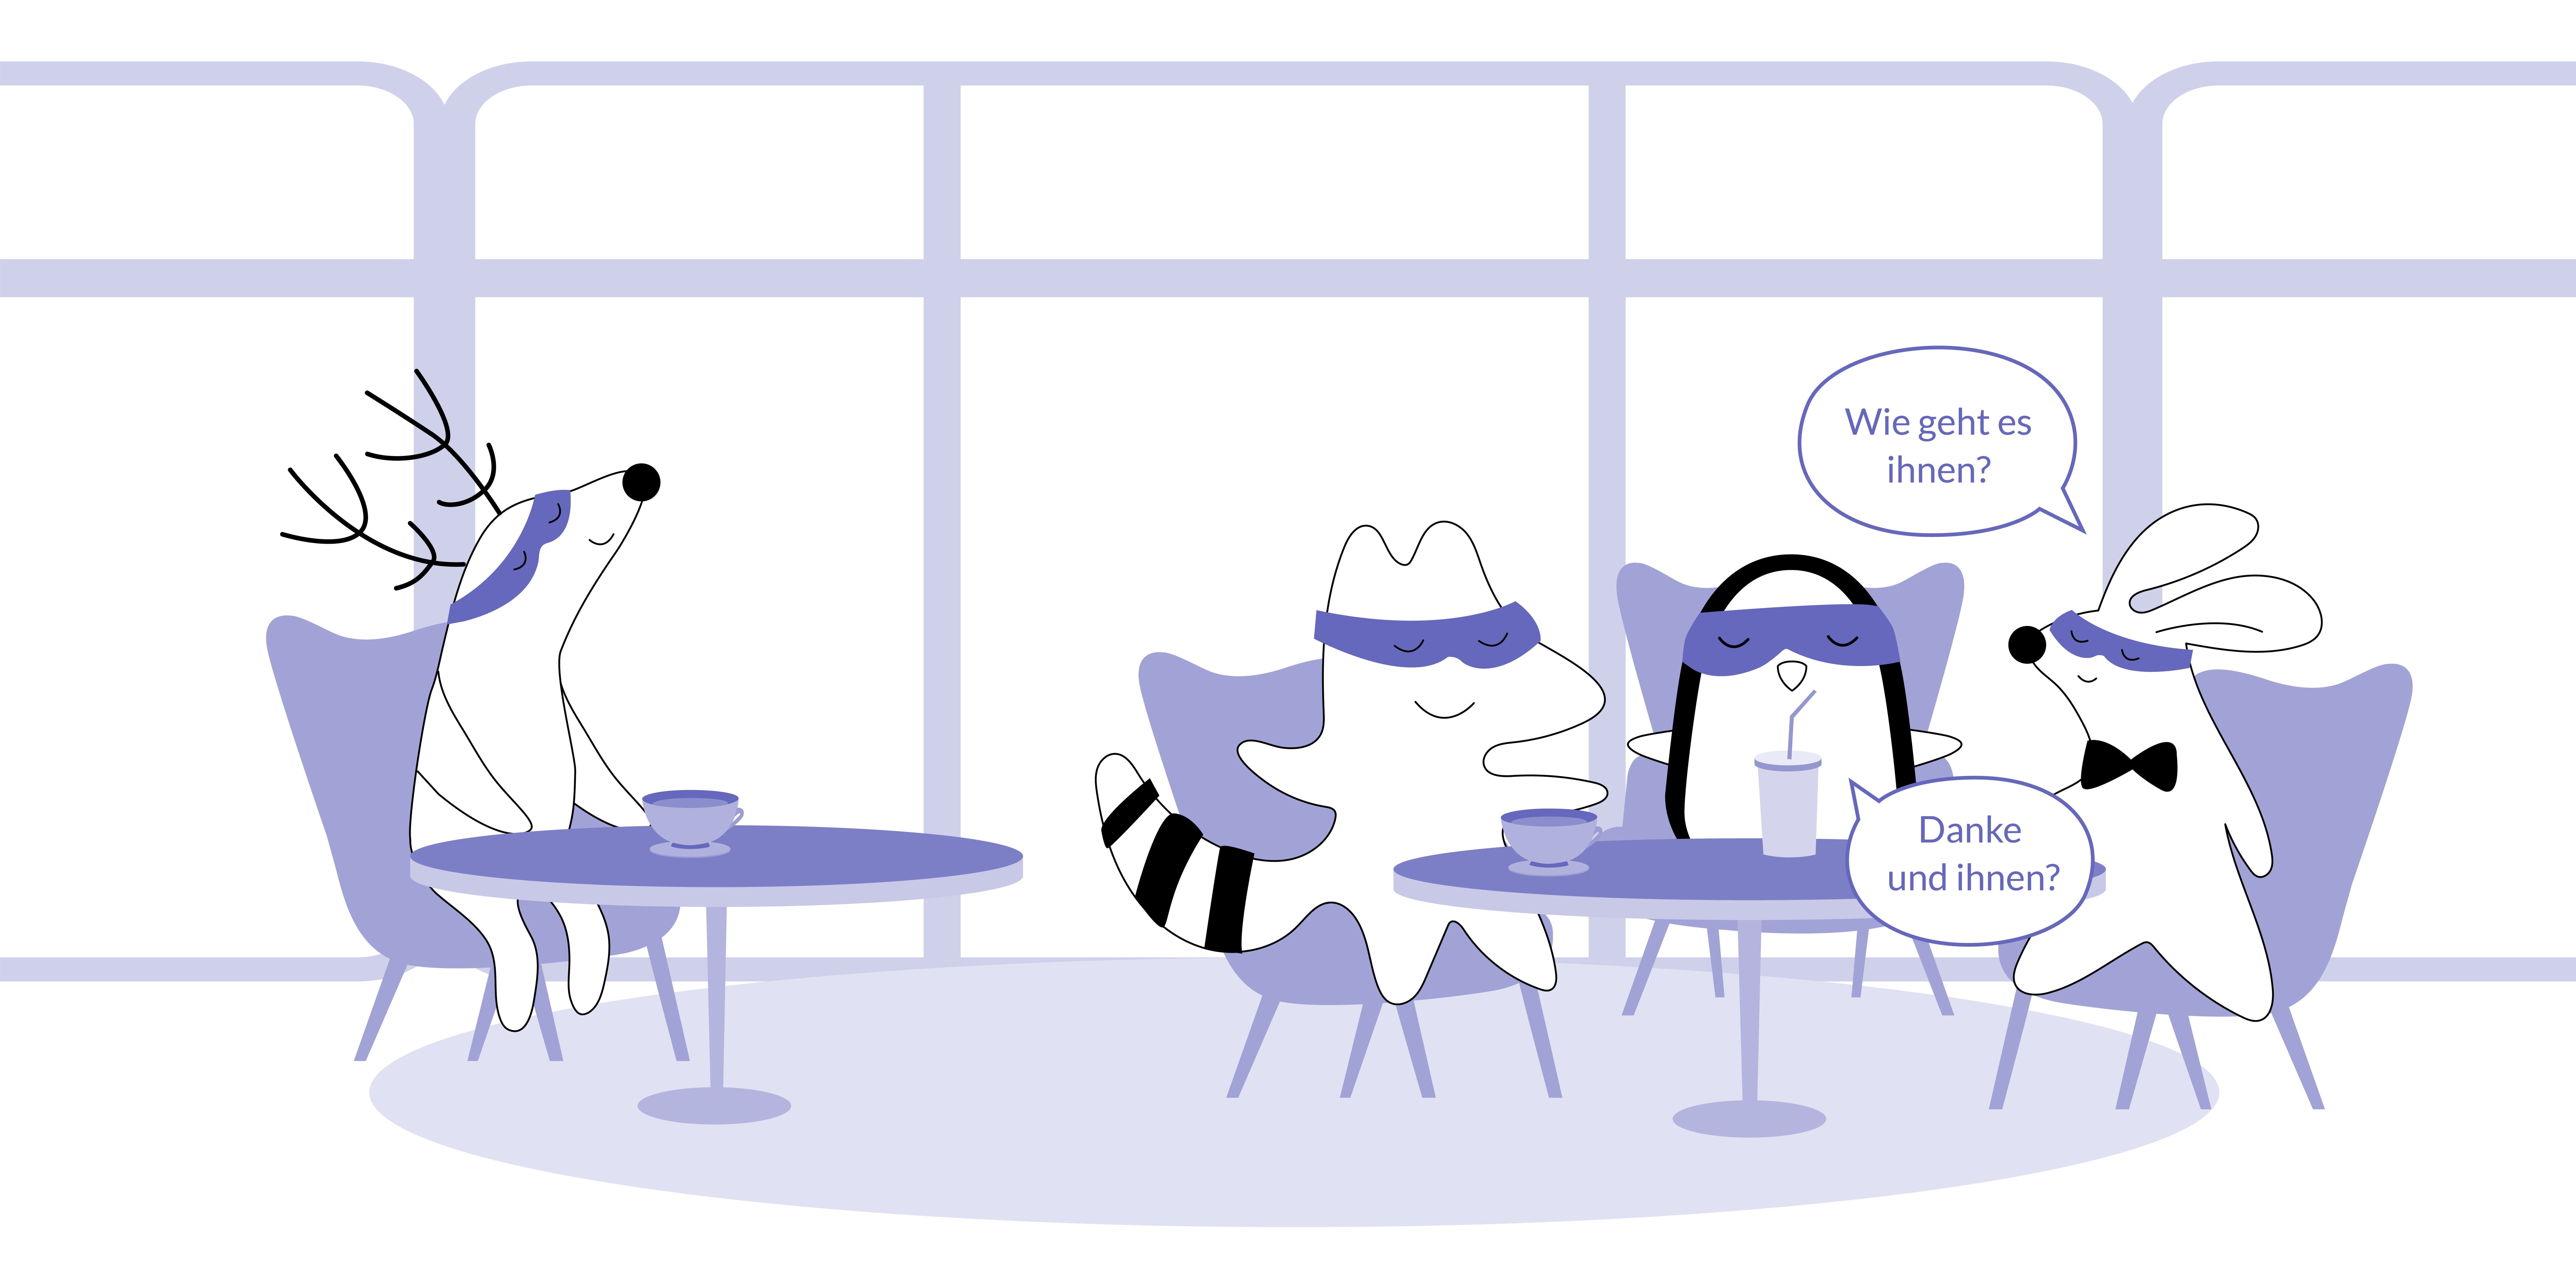 Soren sits at a coffee shop, observing Iggy, Pocky, and Benji having a lively conversation.